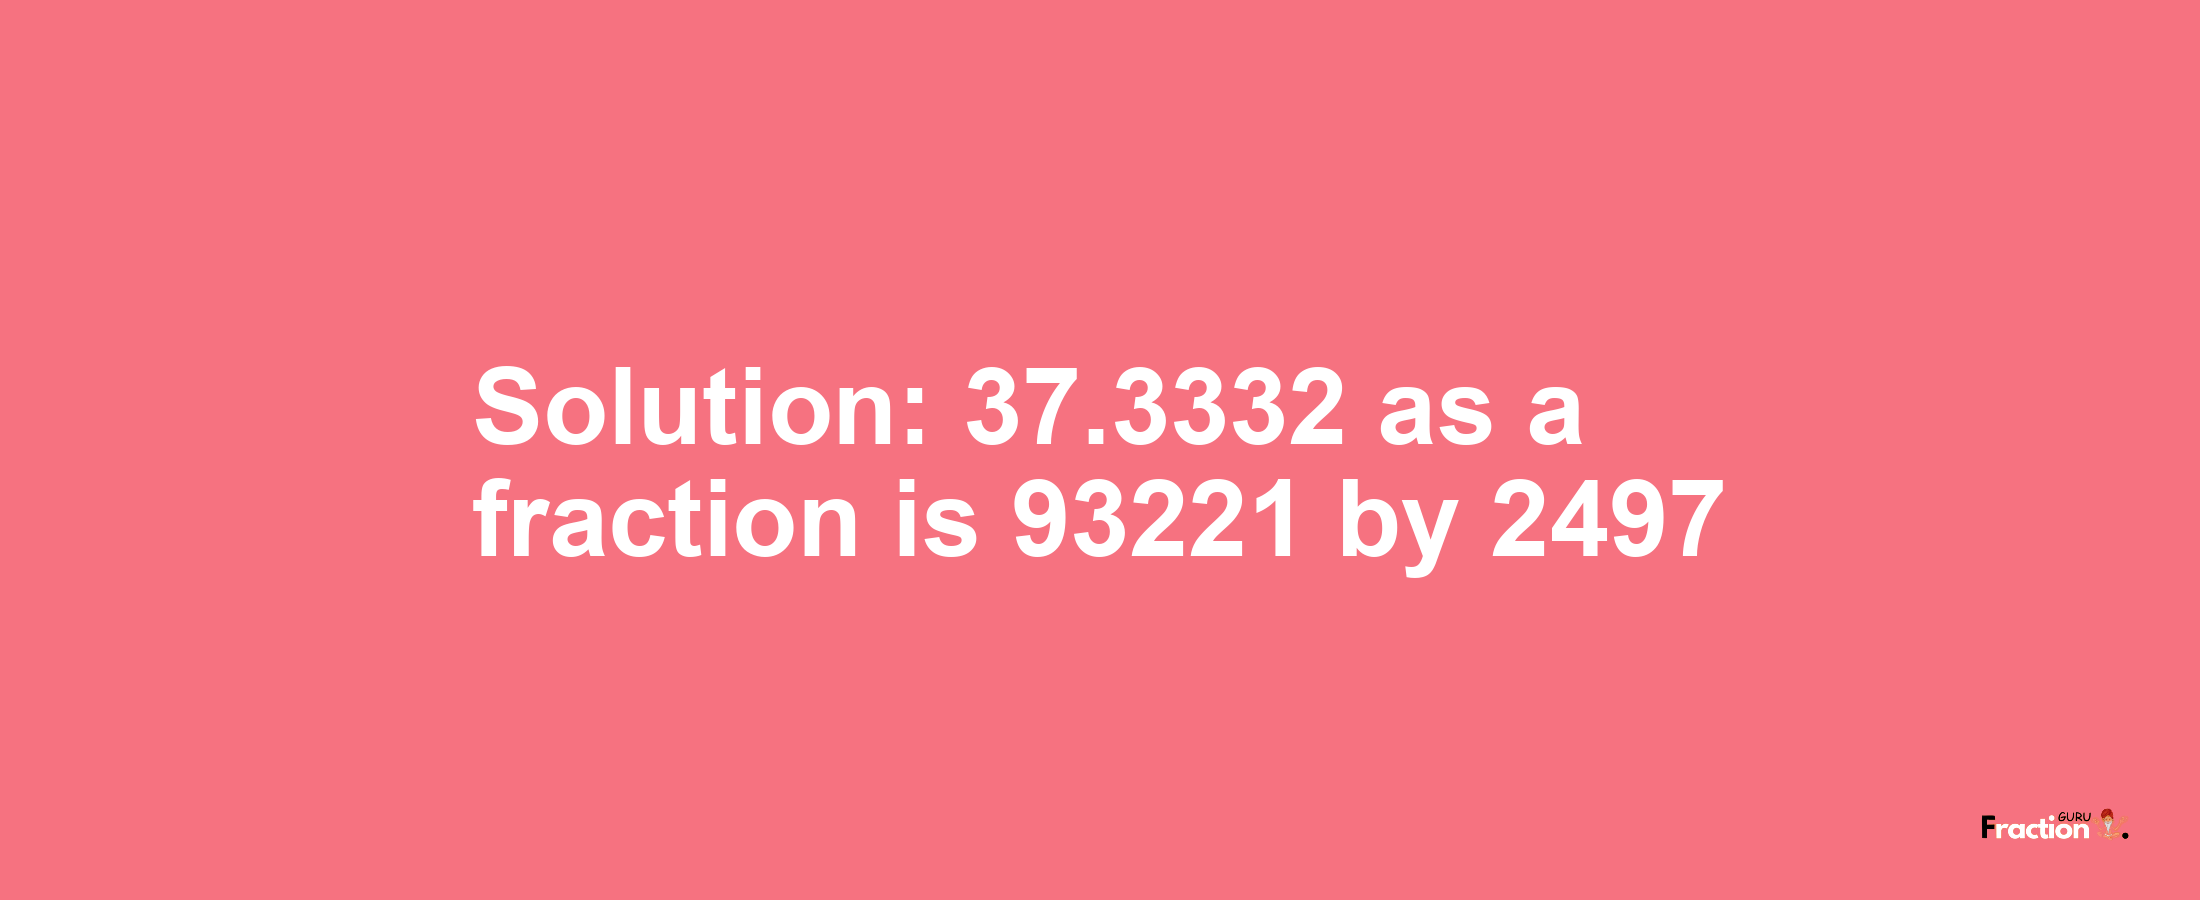 Solution:37.3332 as a fraction is 93221/2497